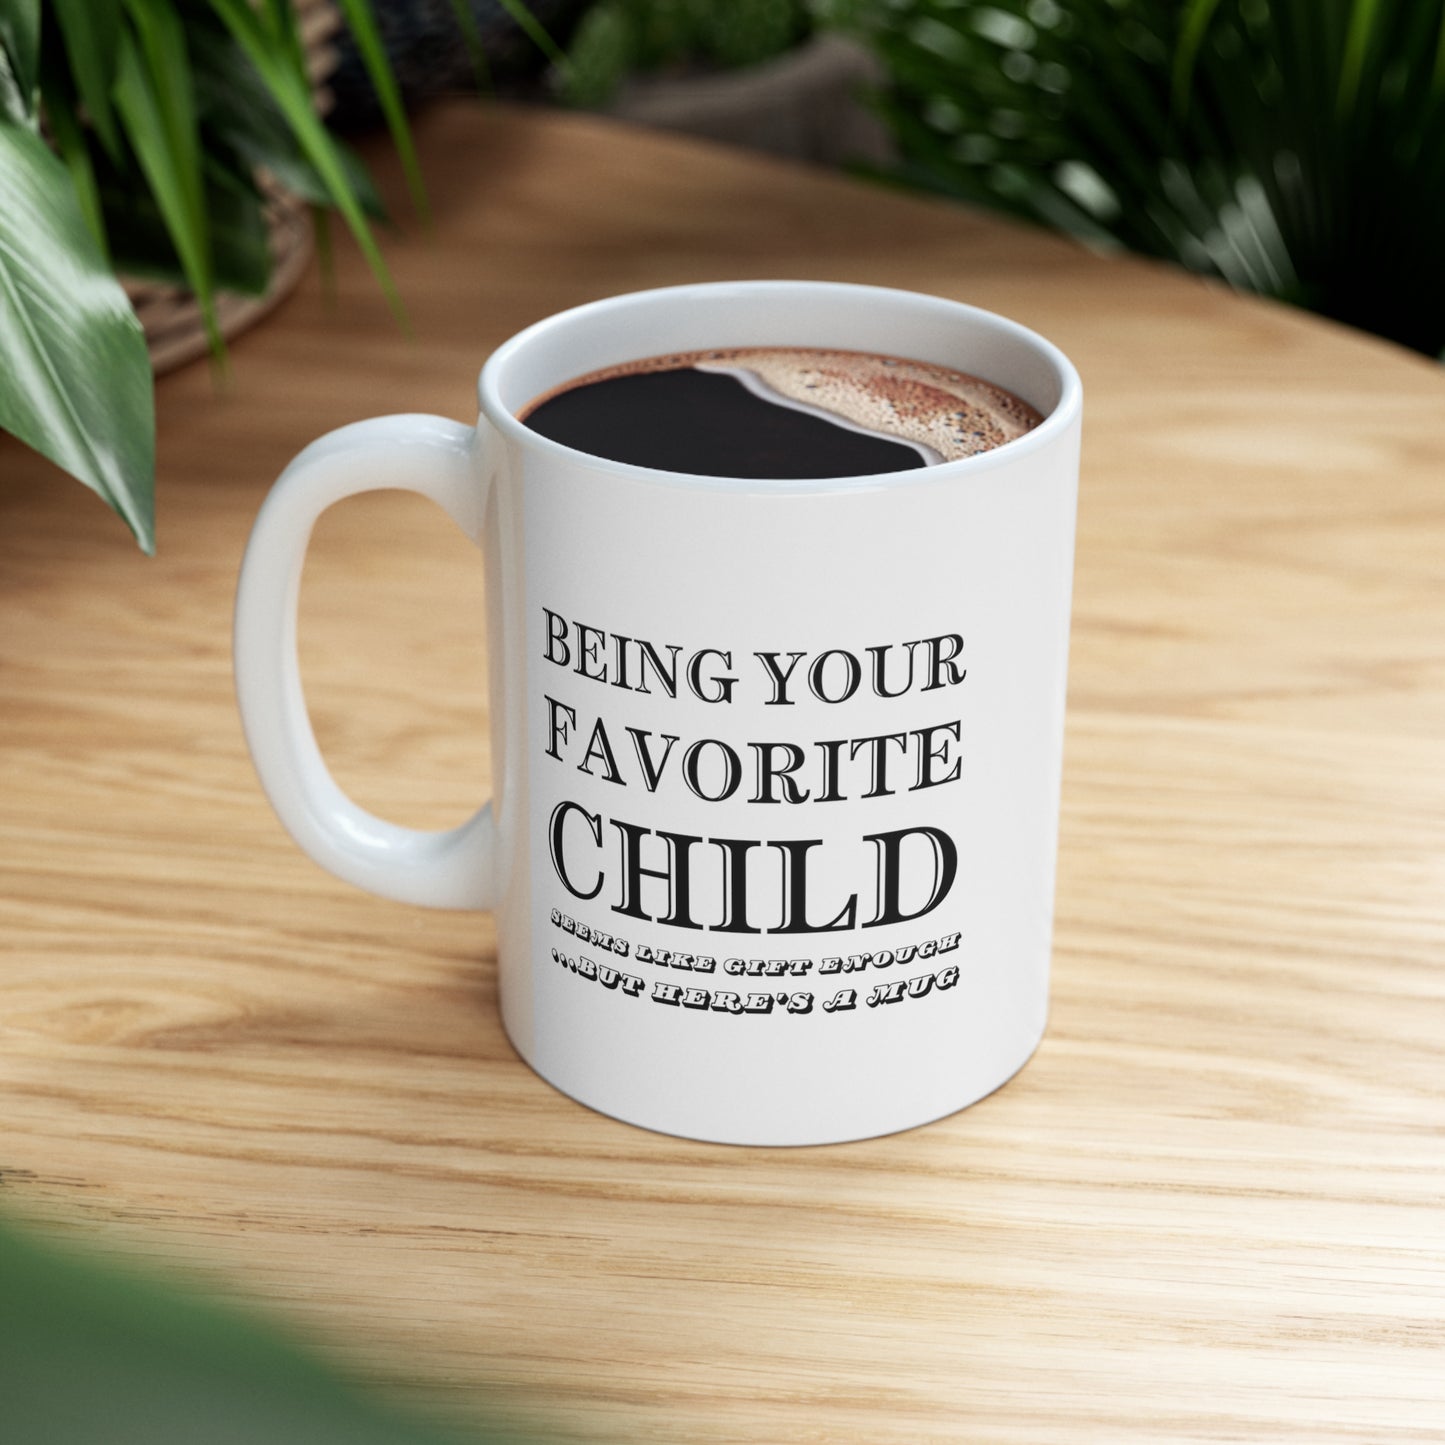 Gift for parents or adult siblings